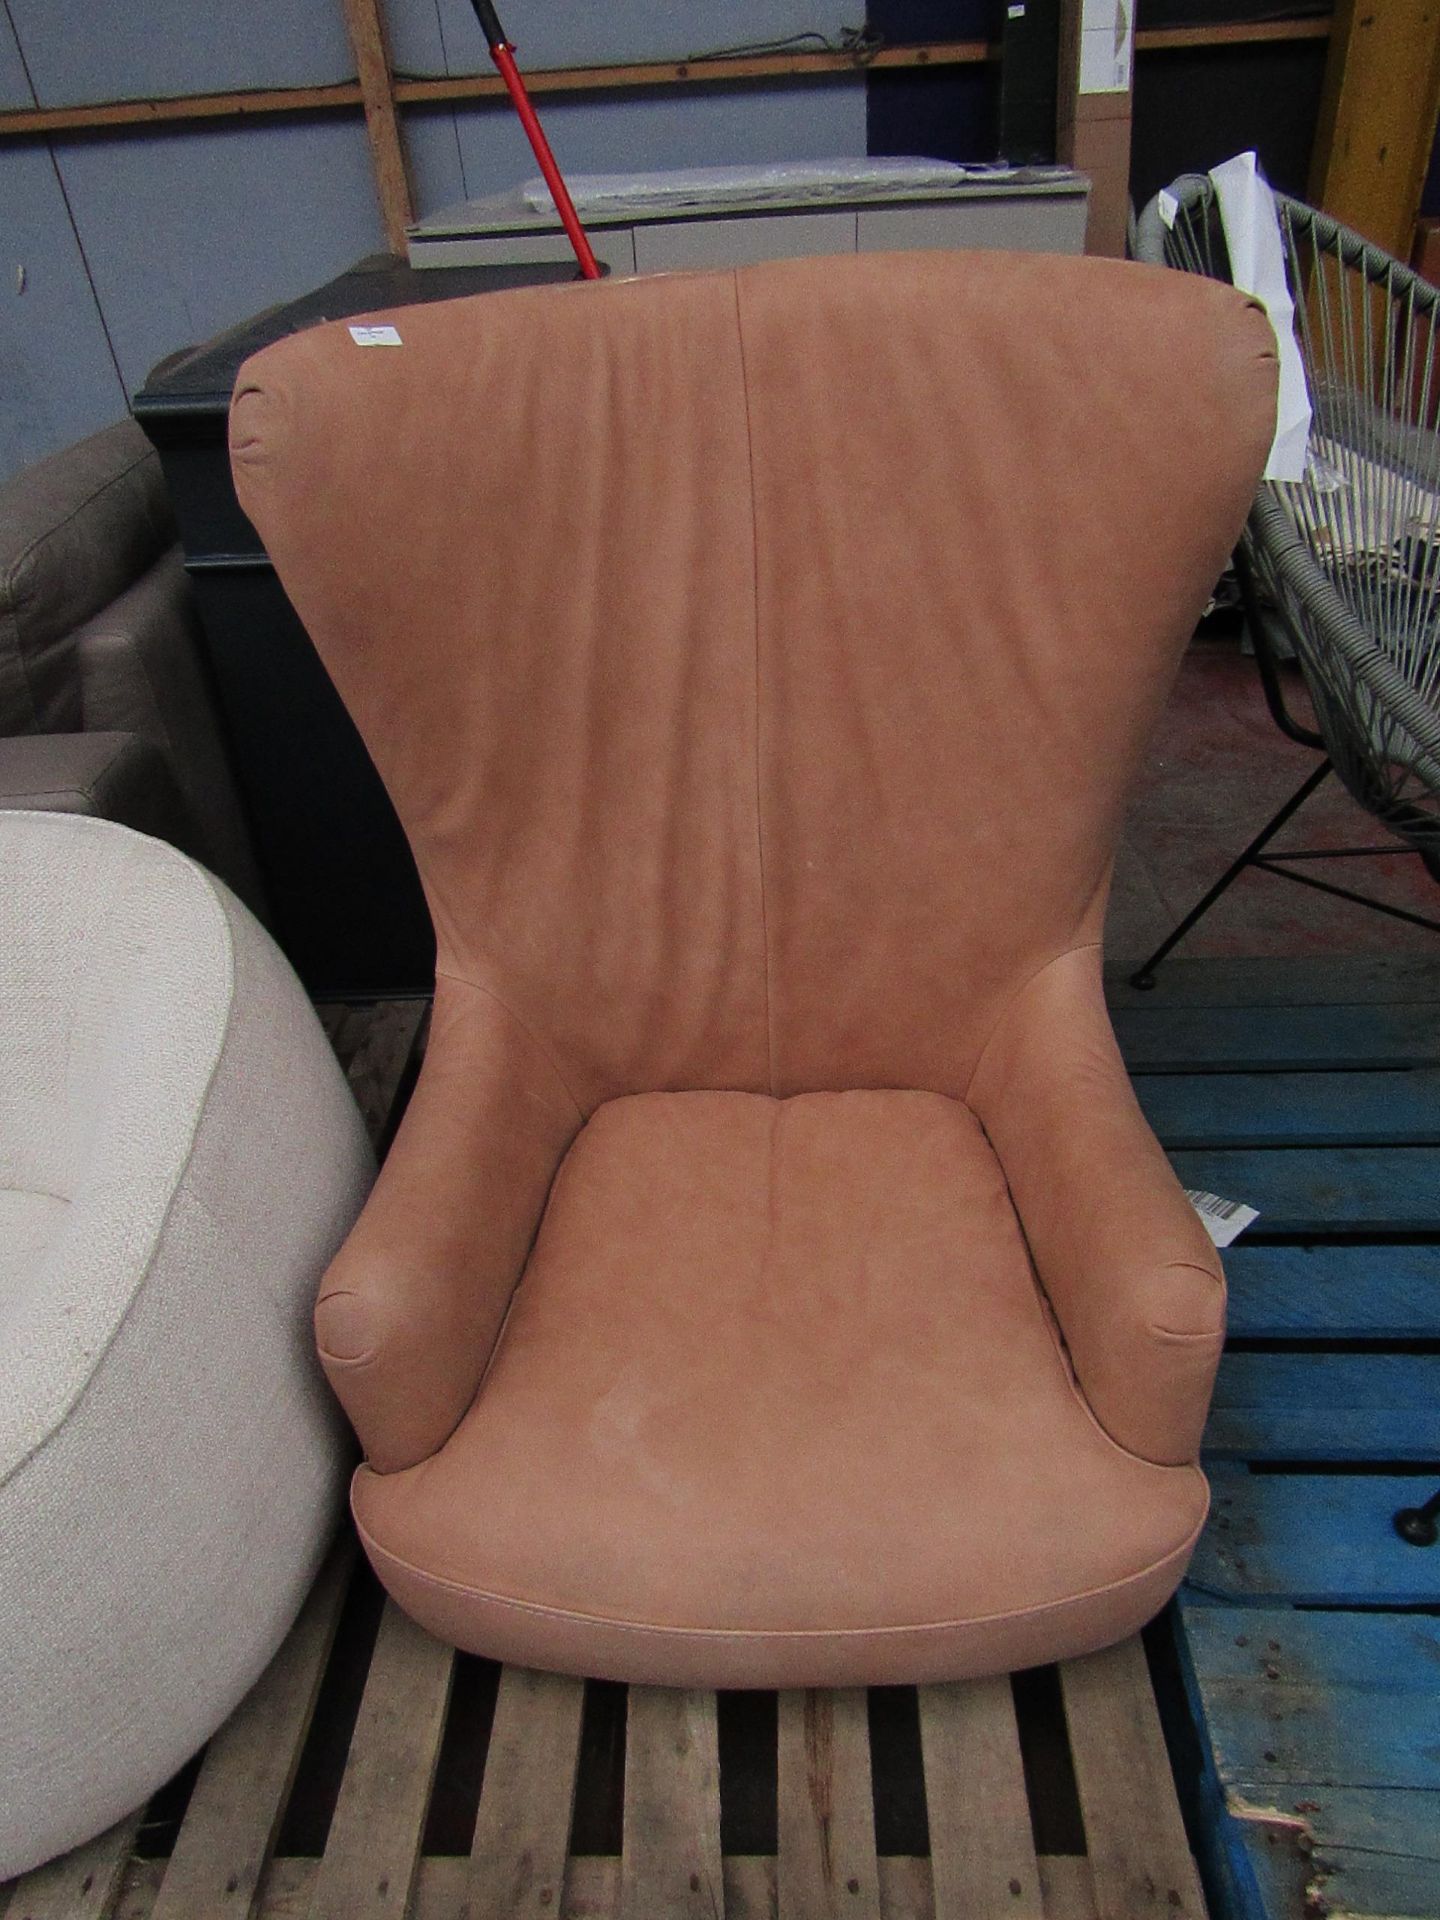 1 x Made.com Bodil Accent Armchair Tan Leather RRP £799 SKU MAD-AP-CHABDL008BRO-UK-BER TOTAL RRP £